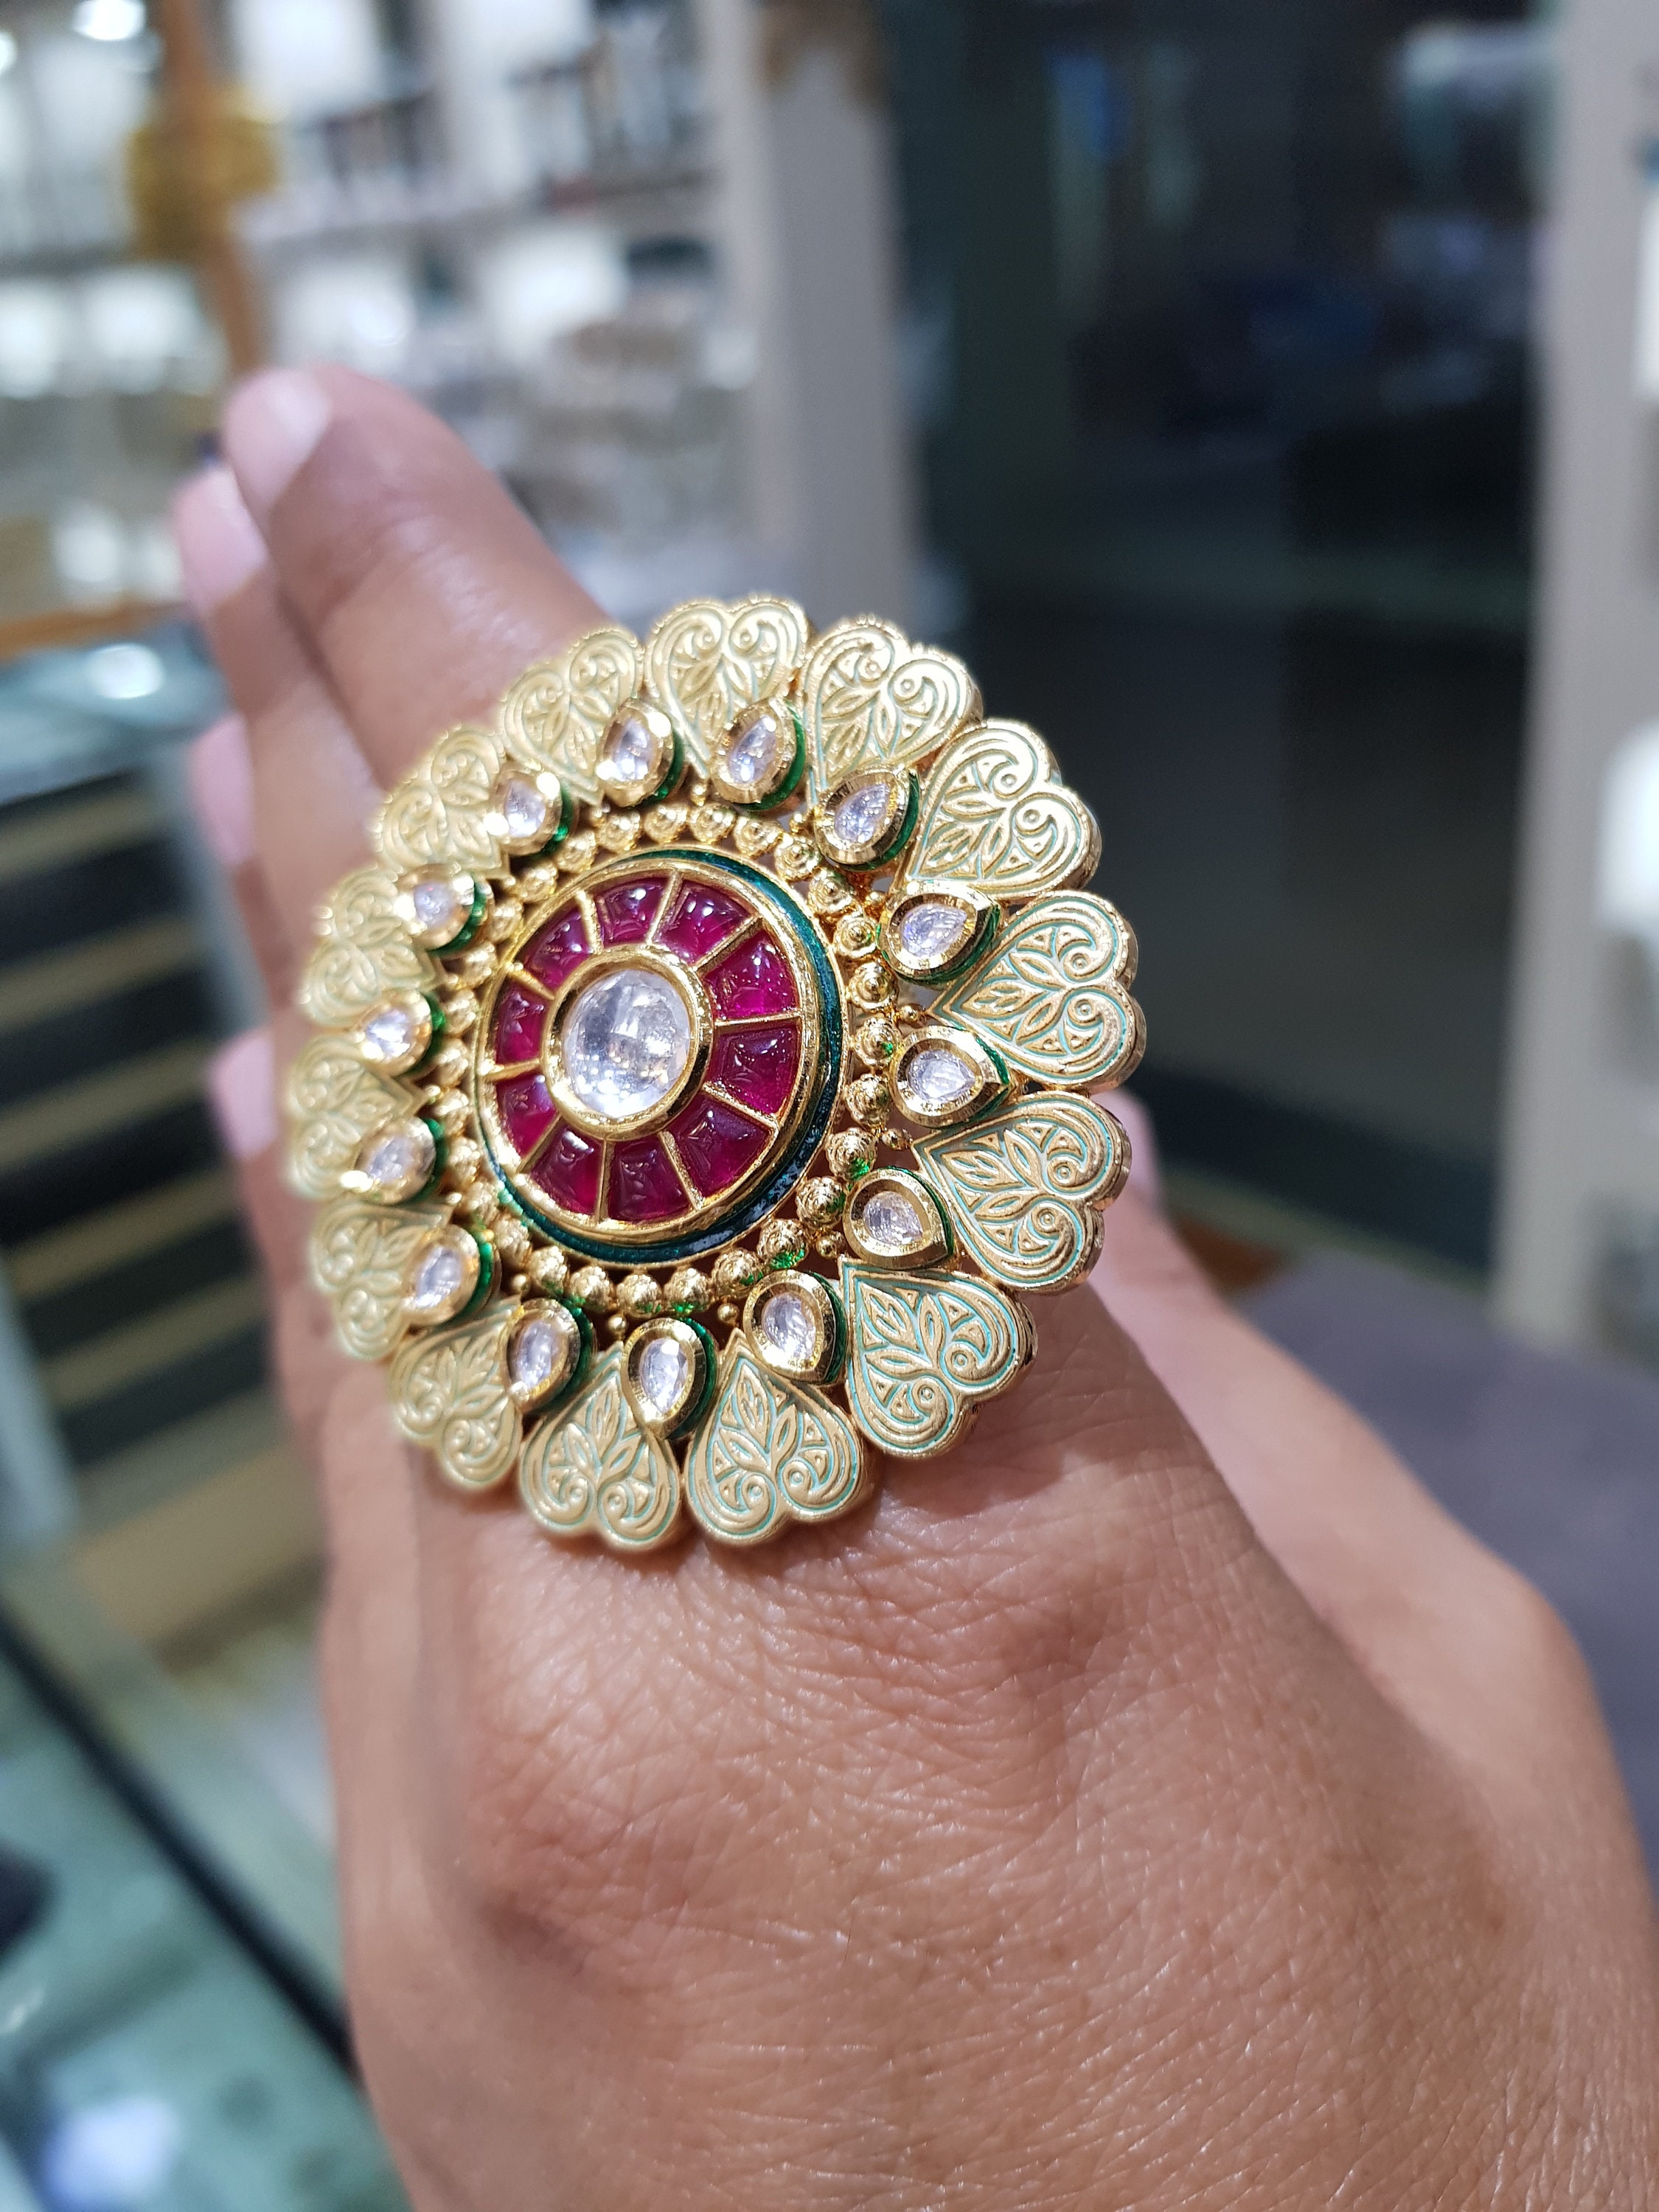 Pin by Mohan Dev on rings | Jewelry rings diamond, Vintage style wedding  rings, Gold ring designs